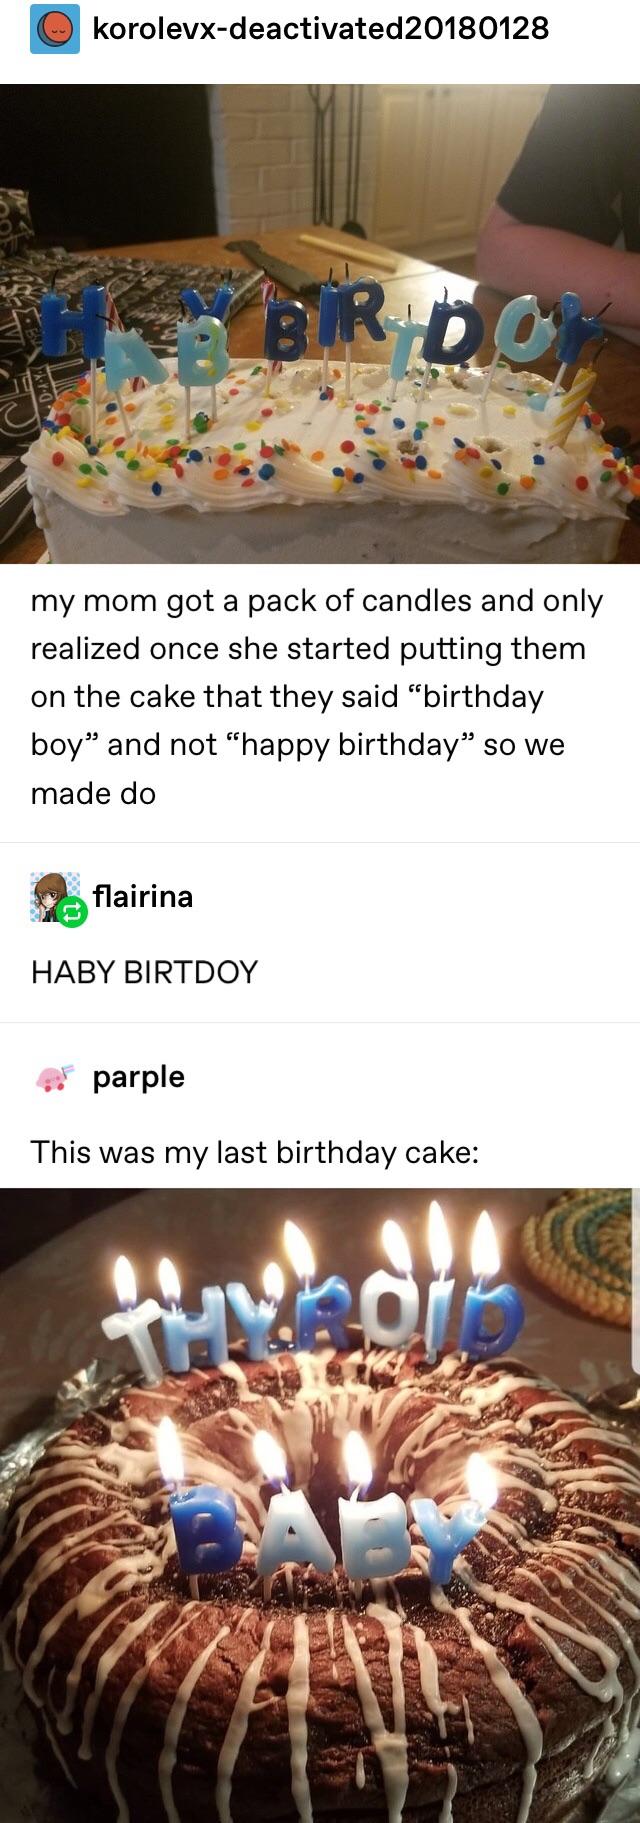 cool pic haby birtdoy - korolevxdeactivated20180128 Yo my mom got a pack of candles and only realized once she started putting them on the cake that they said birthday boy and not happy birthday" so we made do flairina Haby Birtdoy parple This was my last